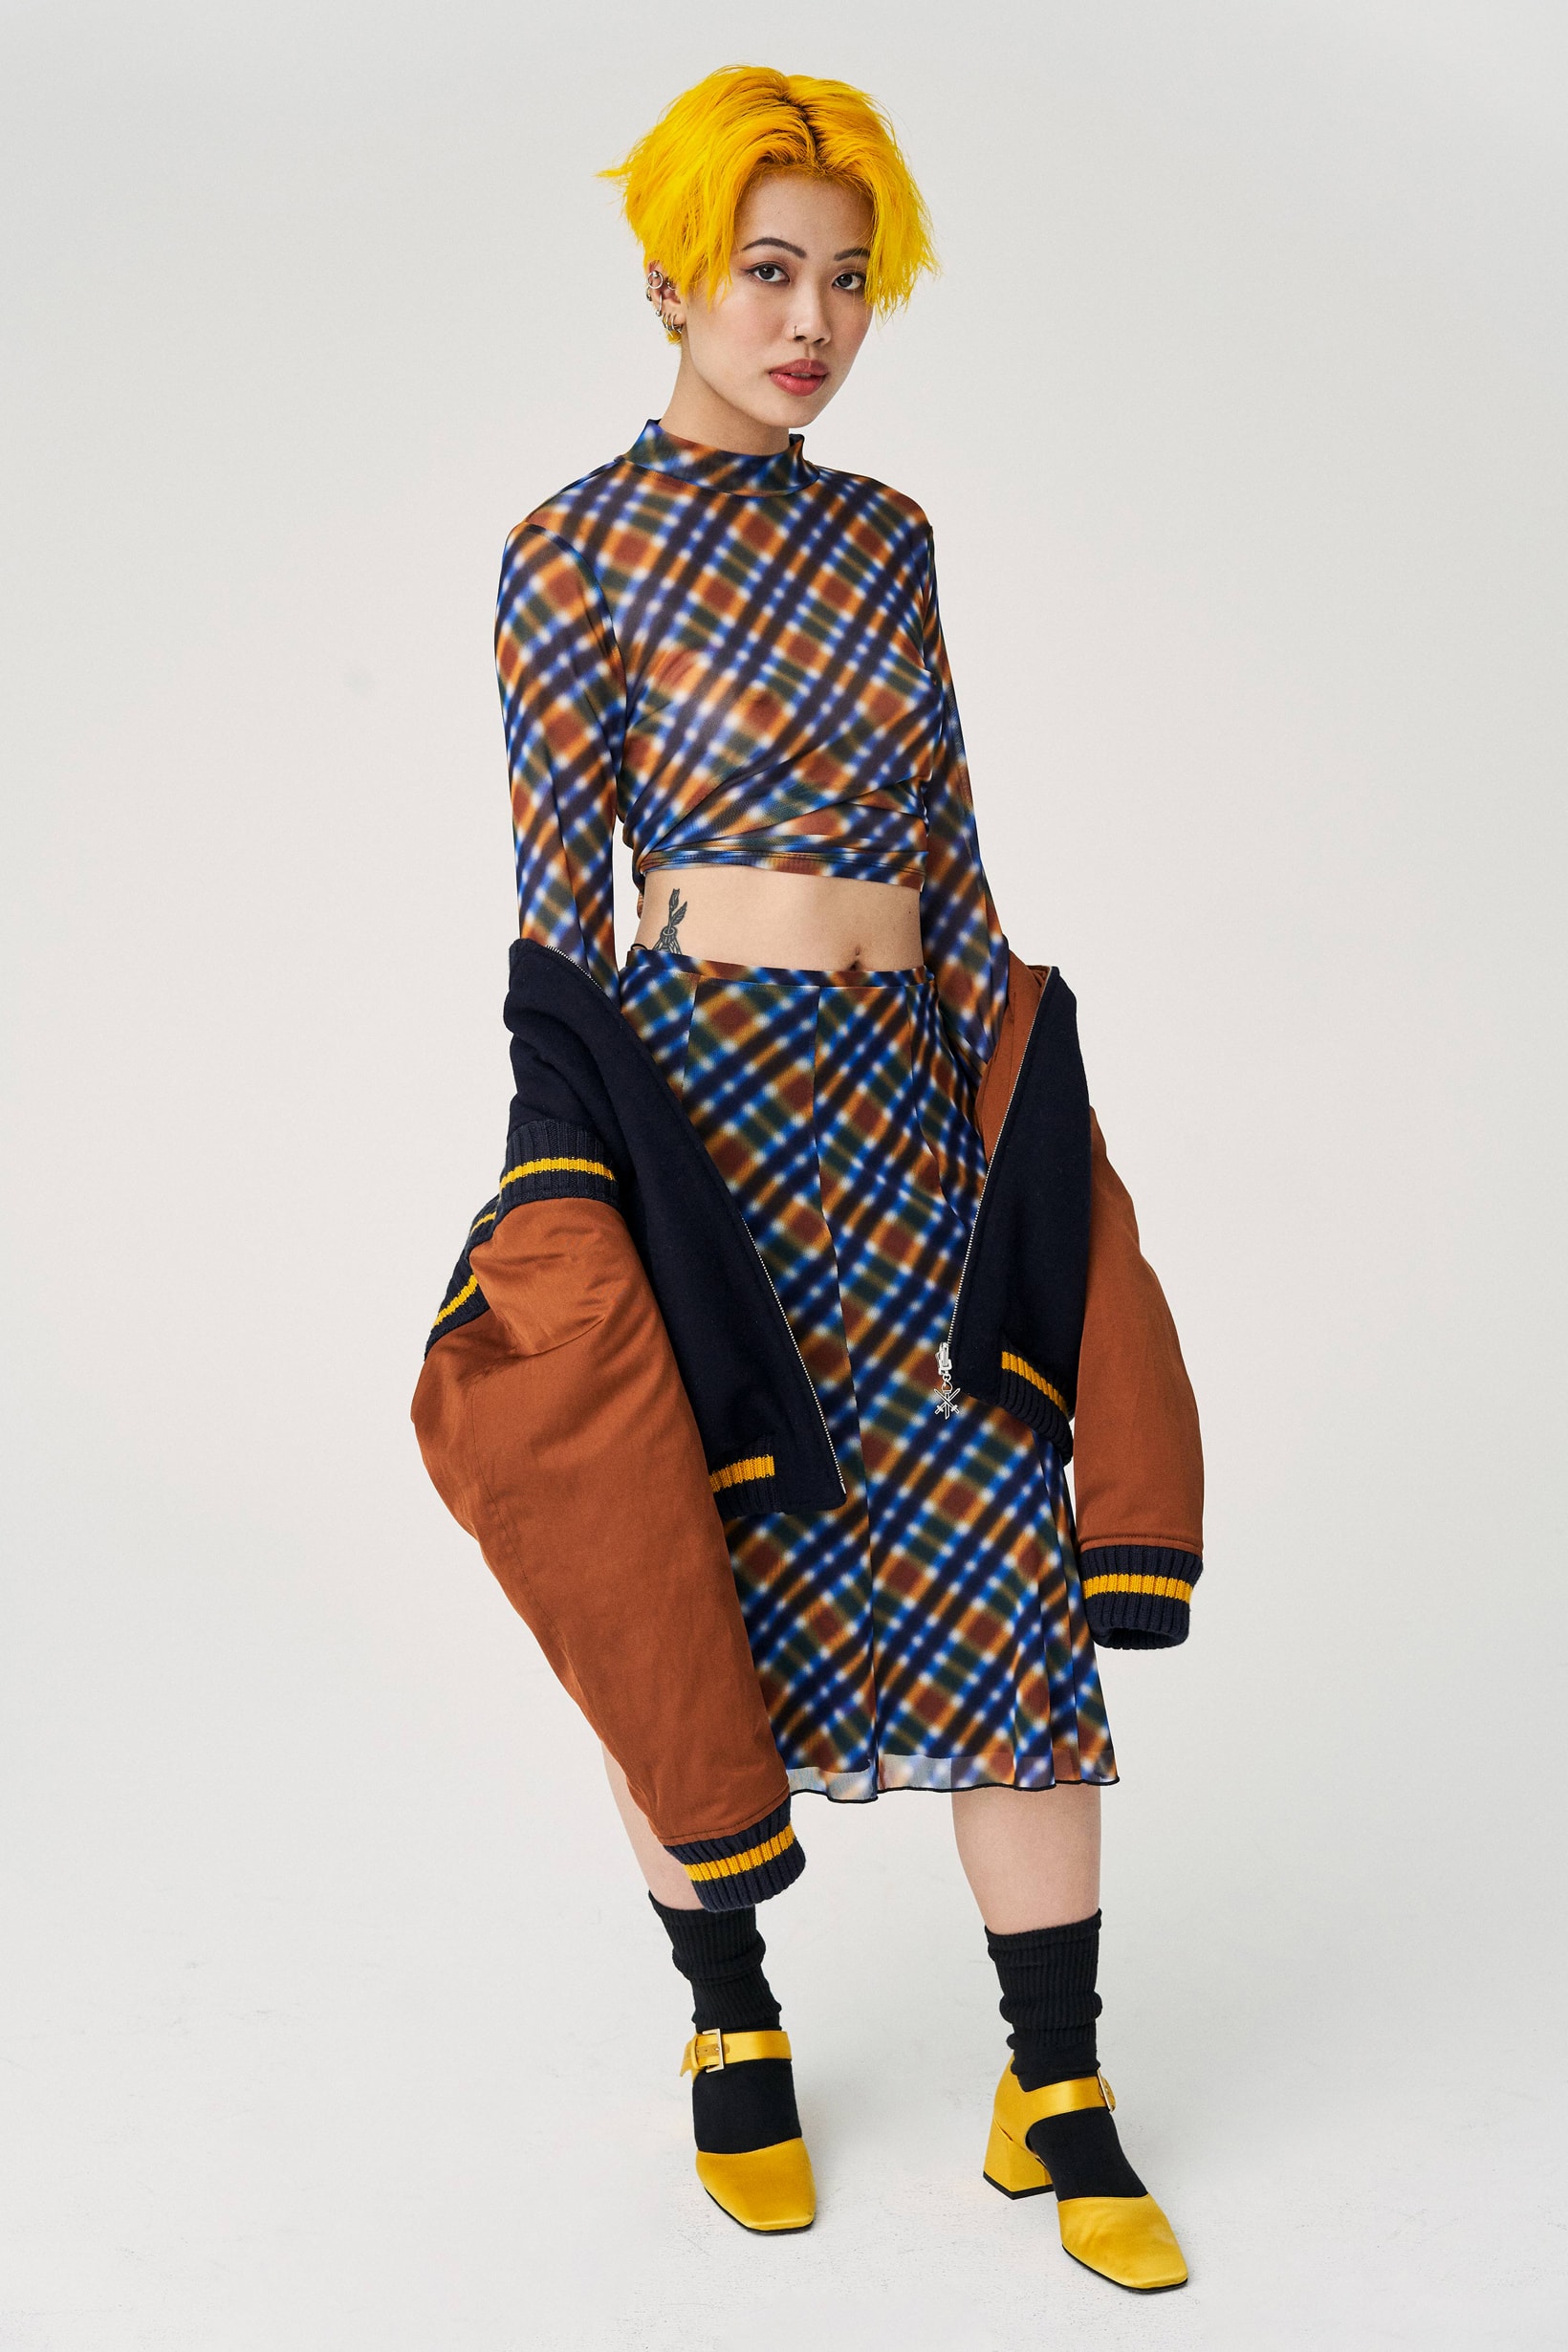 Opening Ceremony Fall Winter 2019 Lookbook Erica Zhang Top Skirt Blue Red